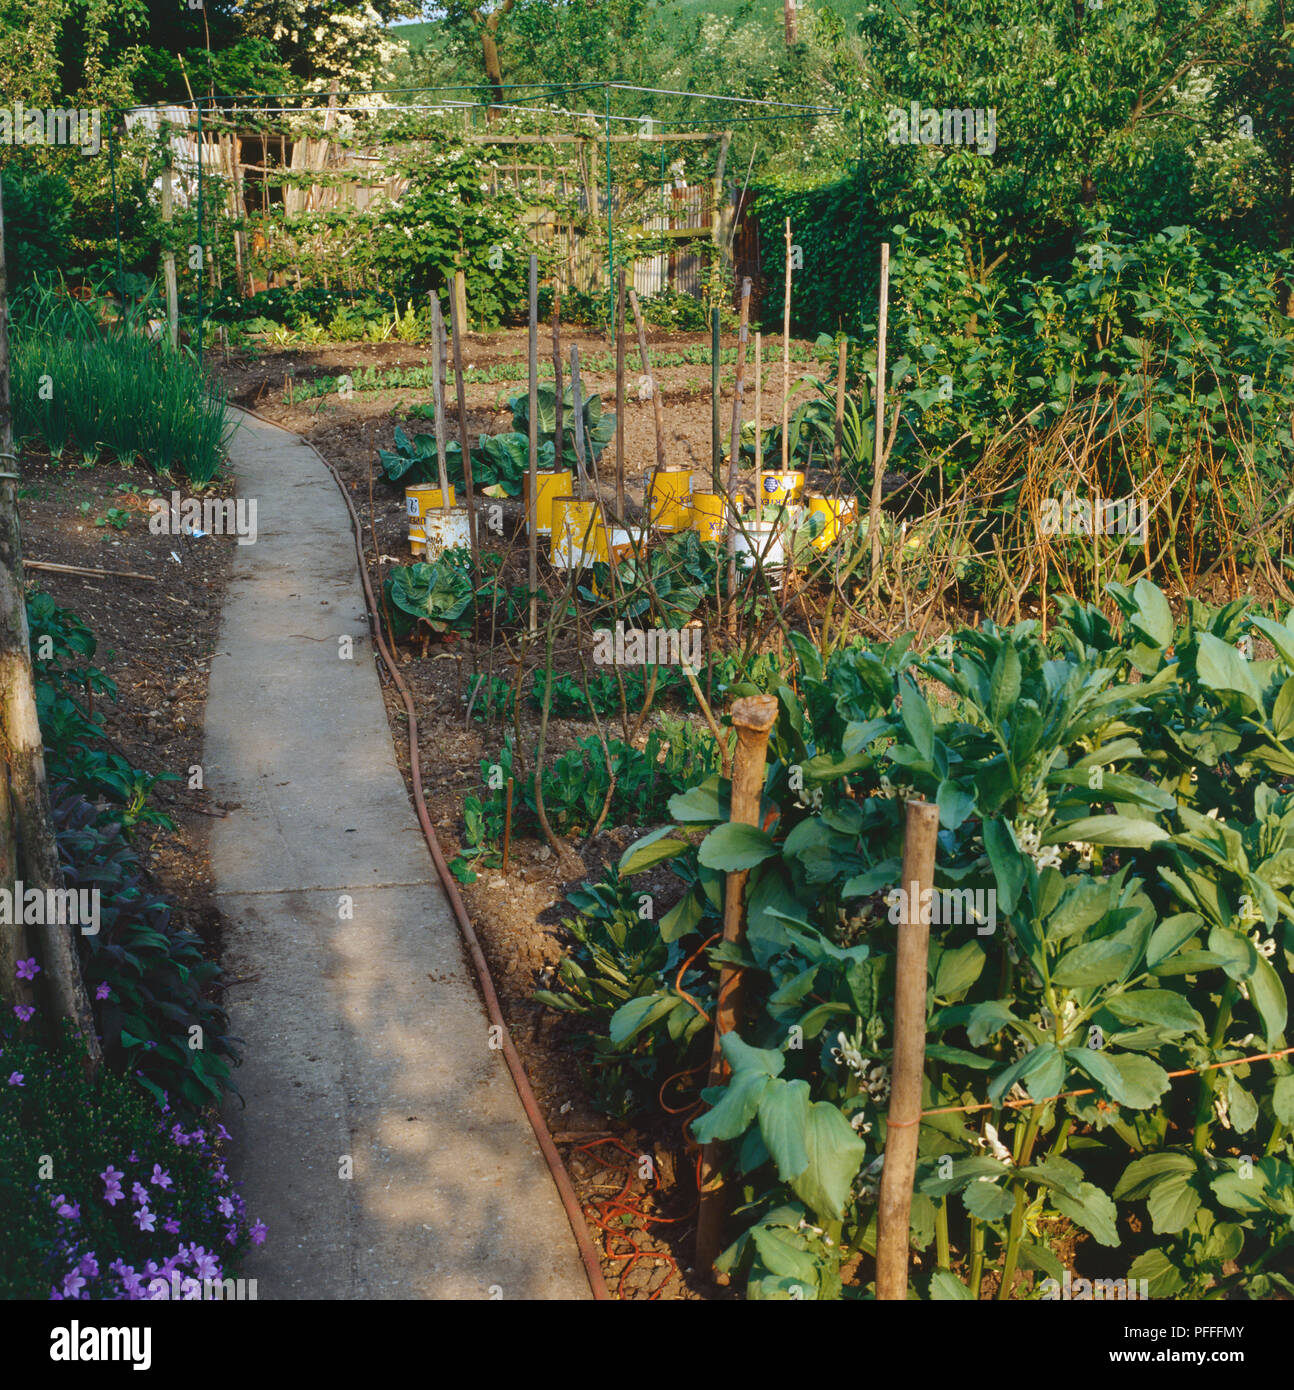 Vegetable garden, rows of vegetable leaves and tops, peas, broad beans and cabbages growing, posts supporting, paint cans protecting young crop, path alongside, wooden fence in background. Stock Photo